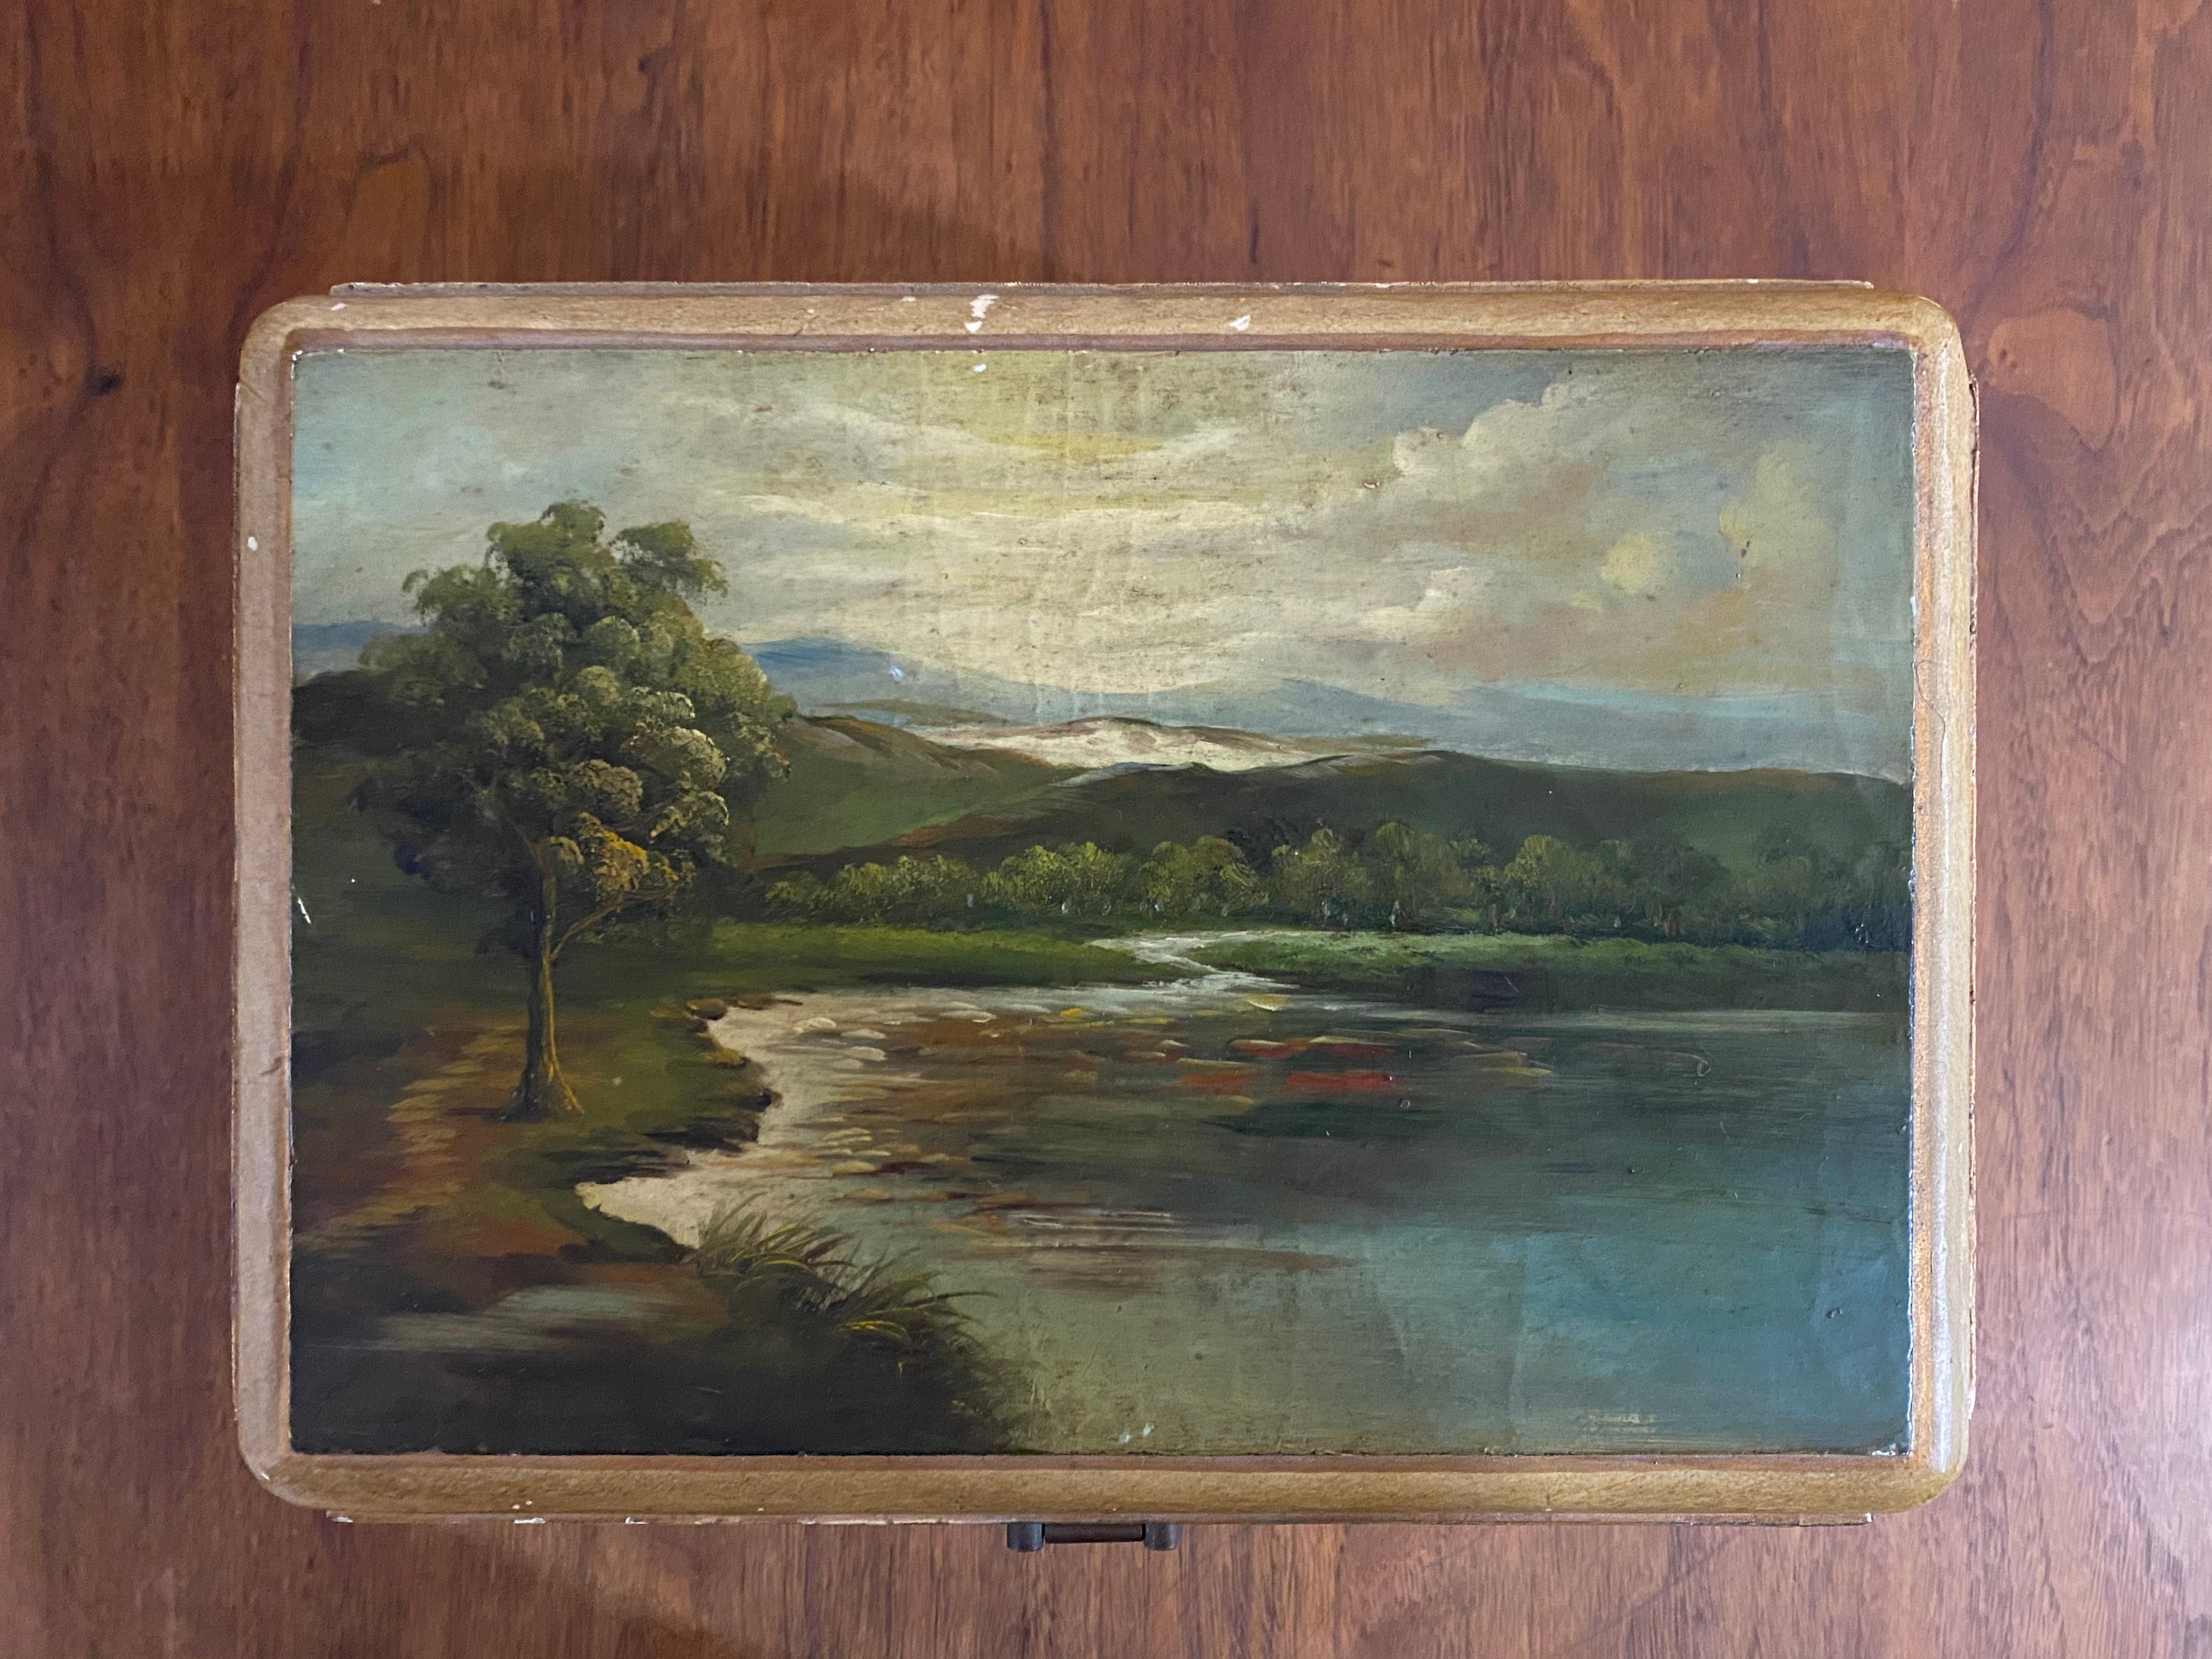 wood box, hand-painted, made in USA 1940s